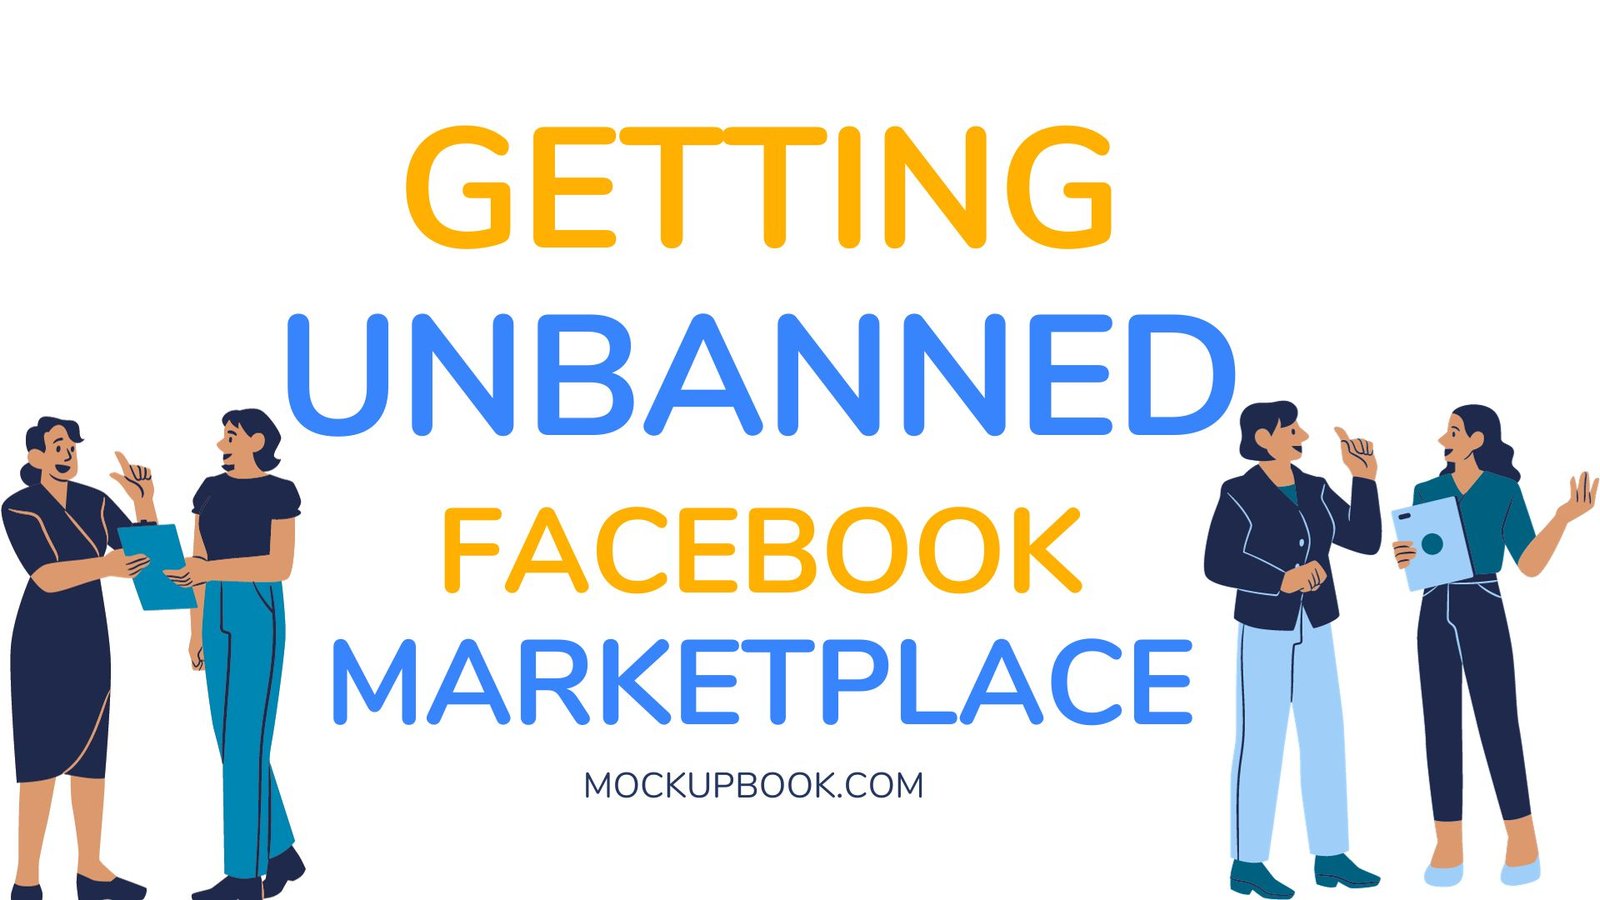 Getting Unbanned from Facebook Marketplace